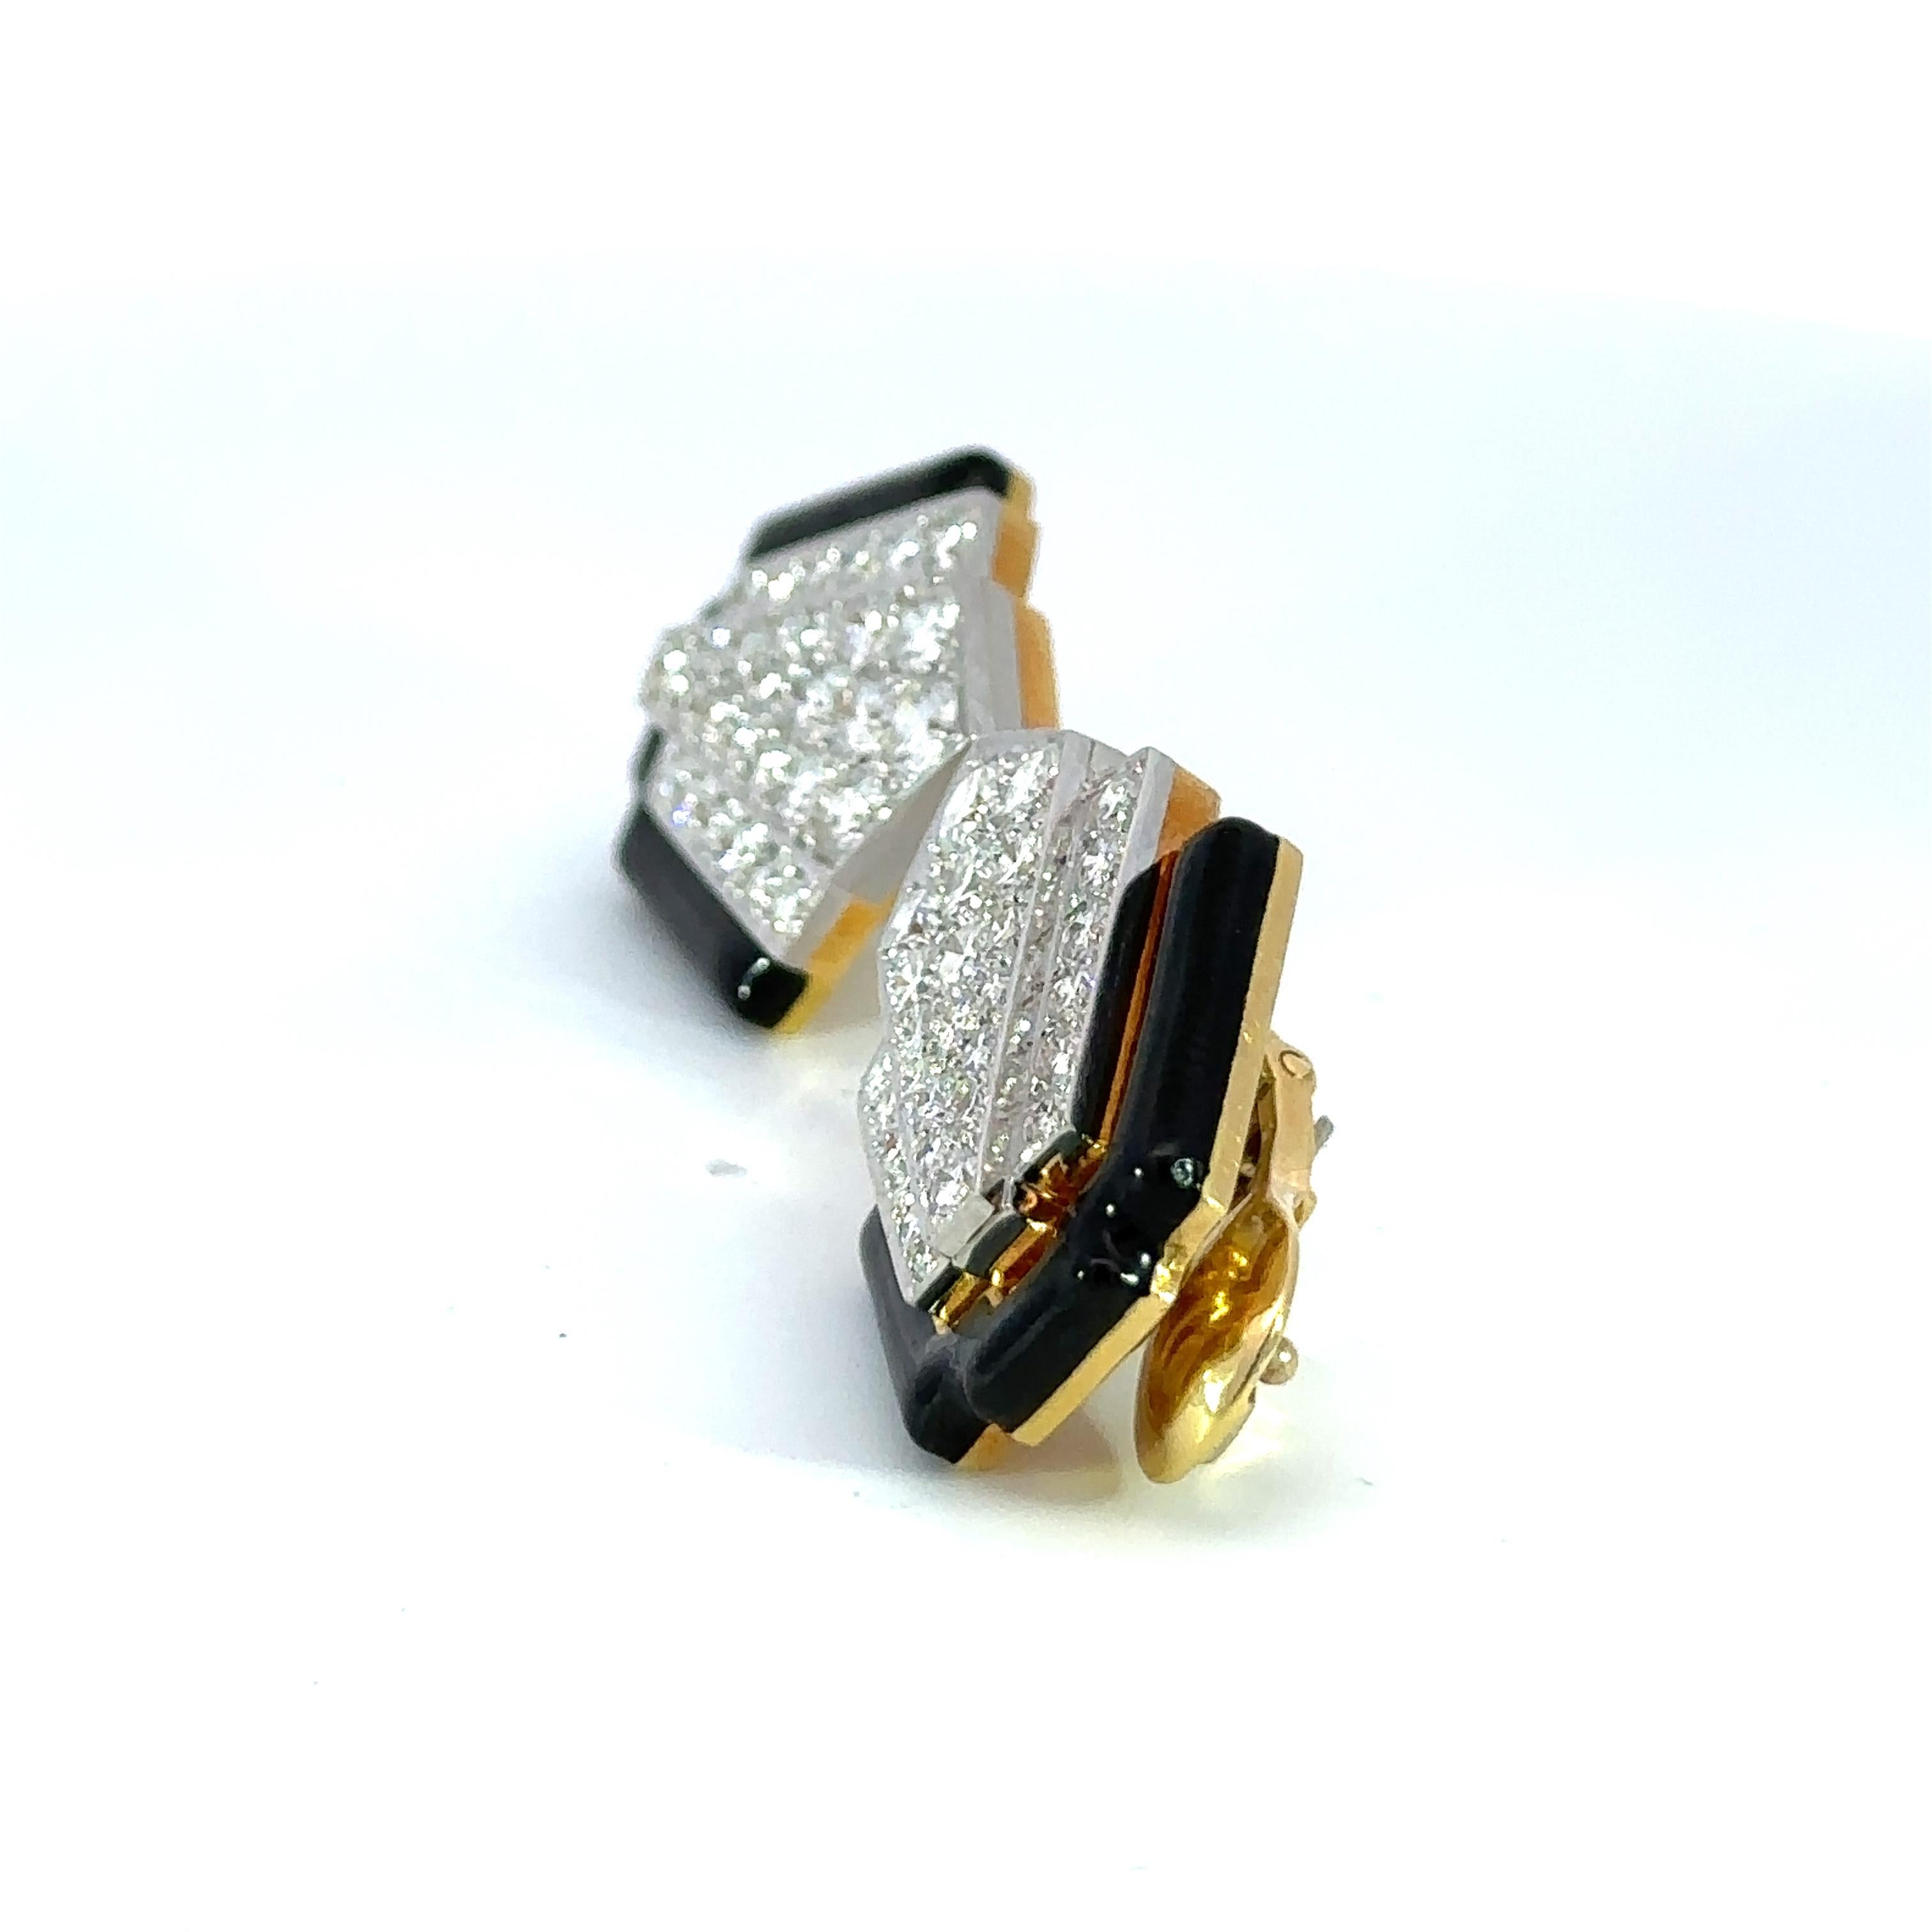 A classic pair of earrings always goes a long way especially when it's made by David Webb.
Empire style, Bold and elegant design with 4 ct diamonds and black enamel. Clip On closure with a post for security Excellent condition.
Length: 27mm